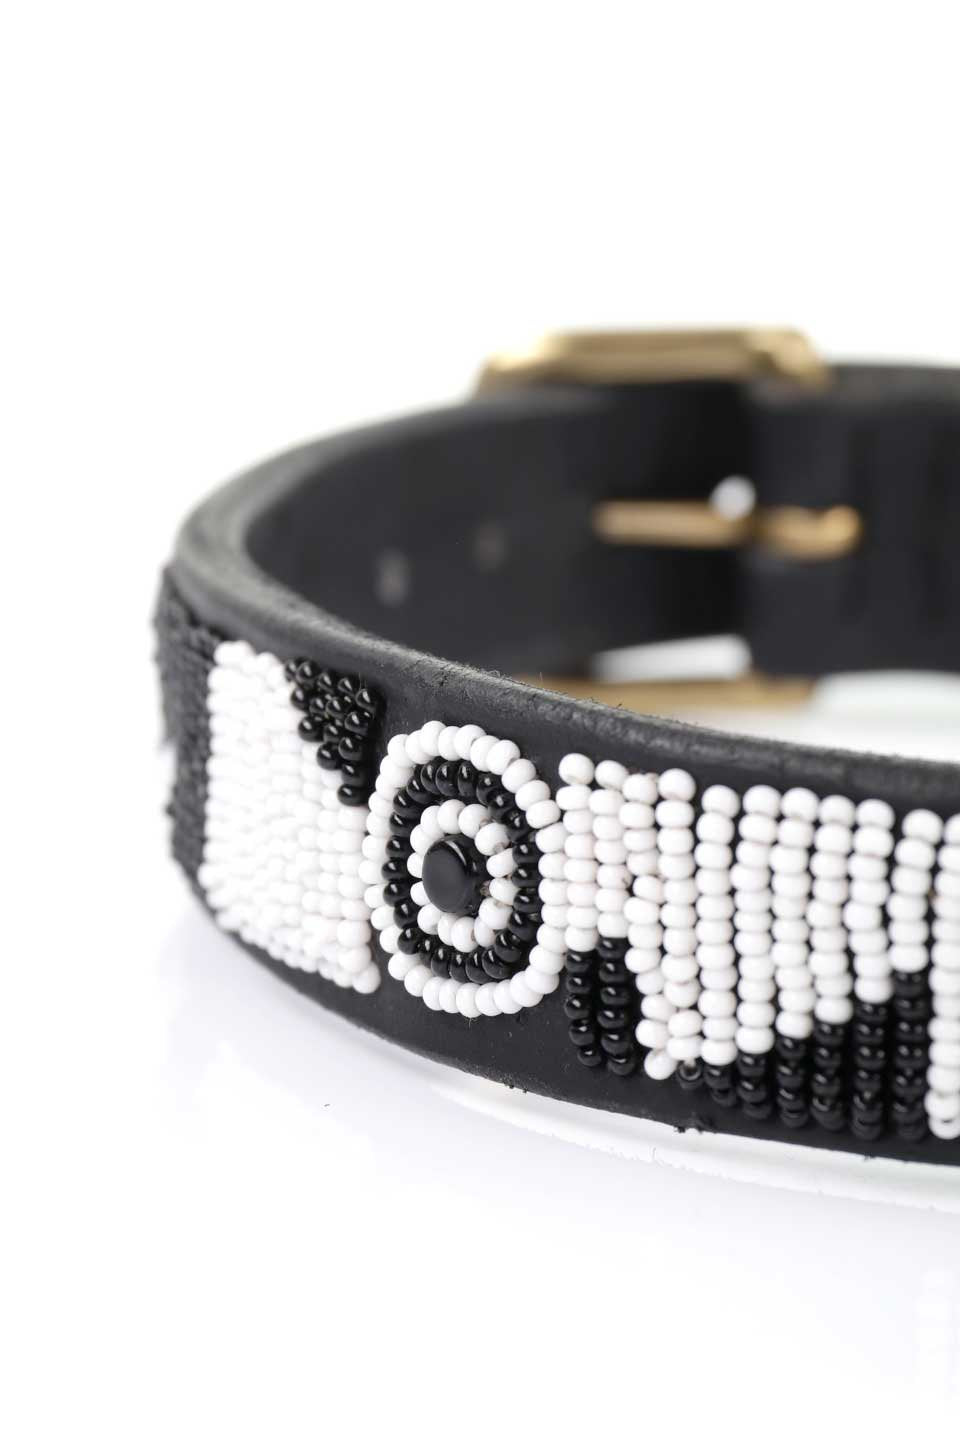 Evony&Ivory Beaded Dog Collar 18" エボニー＆アイボリー・ビーズドッグカラー / by THE KENYAN COLLECTION